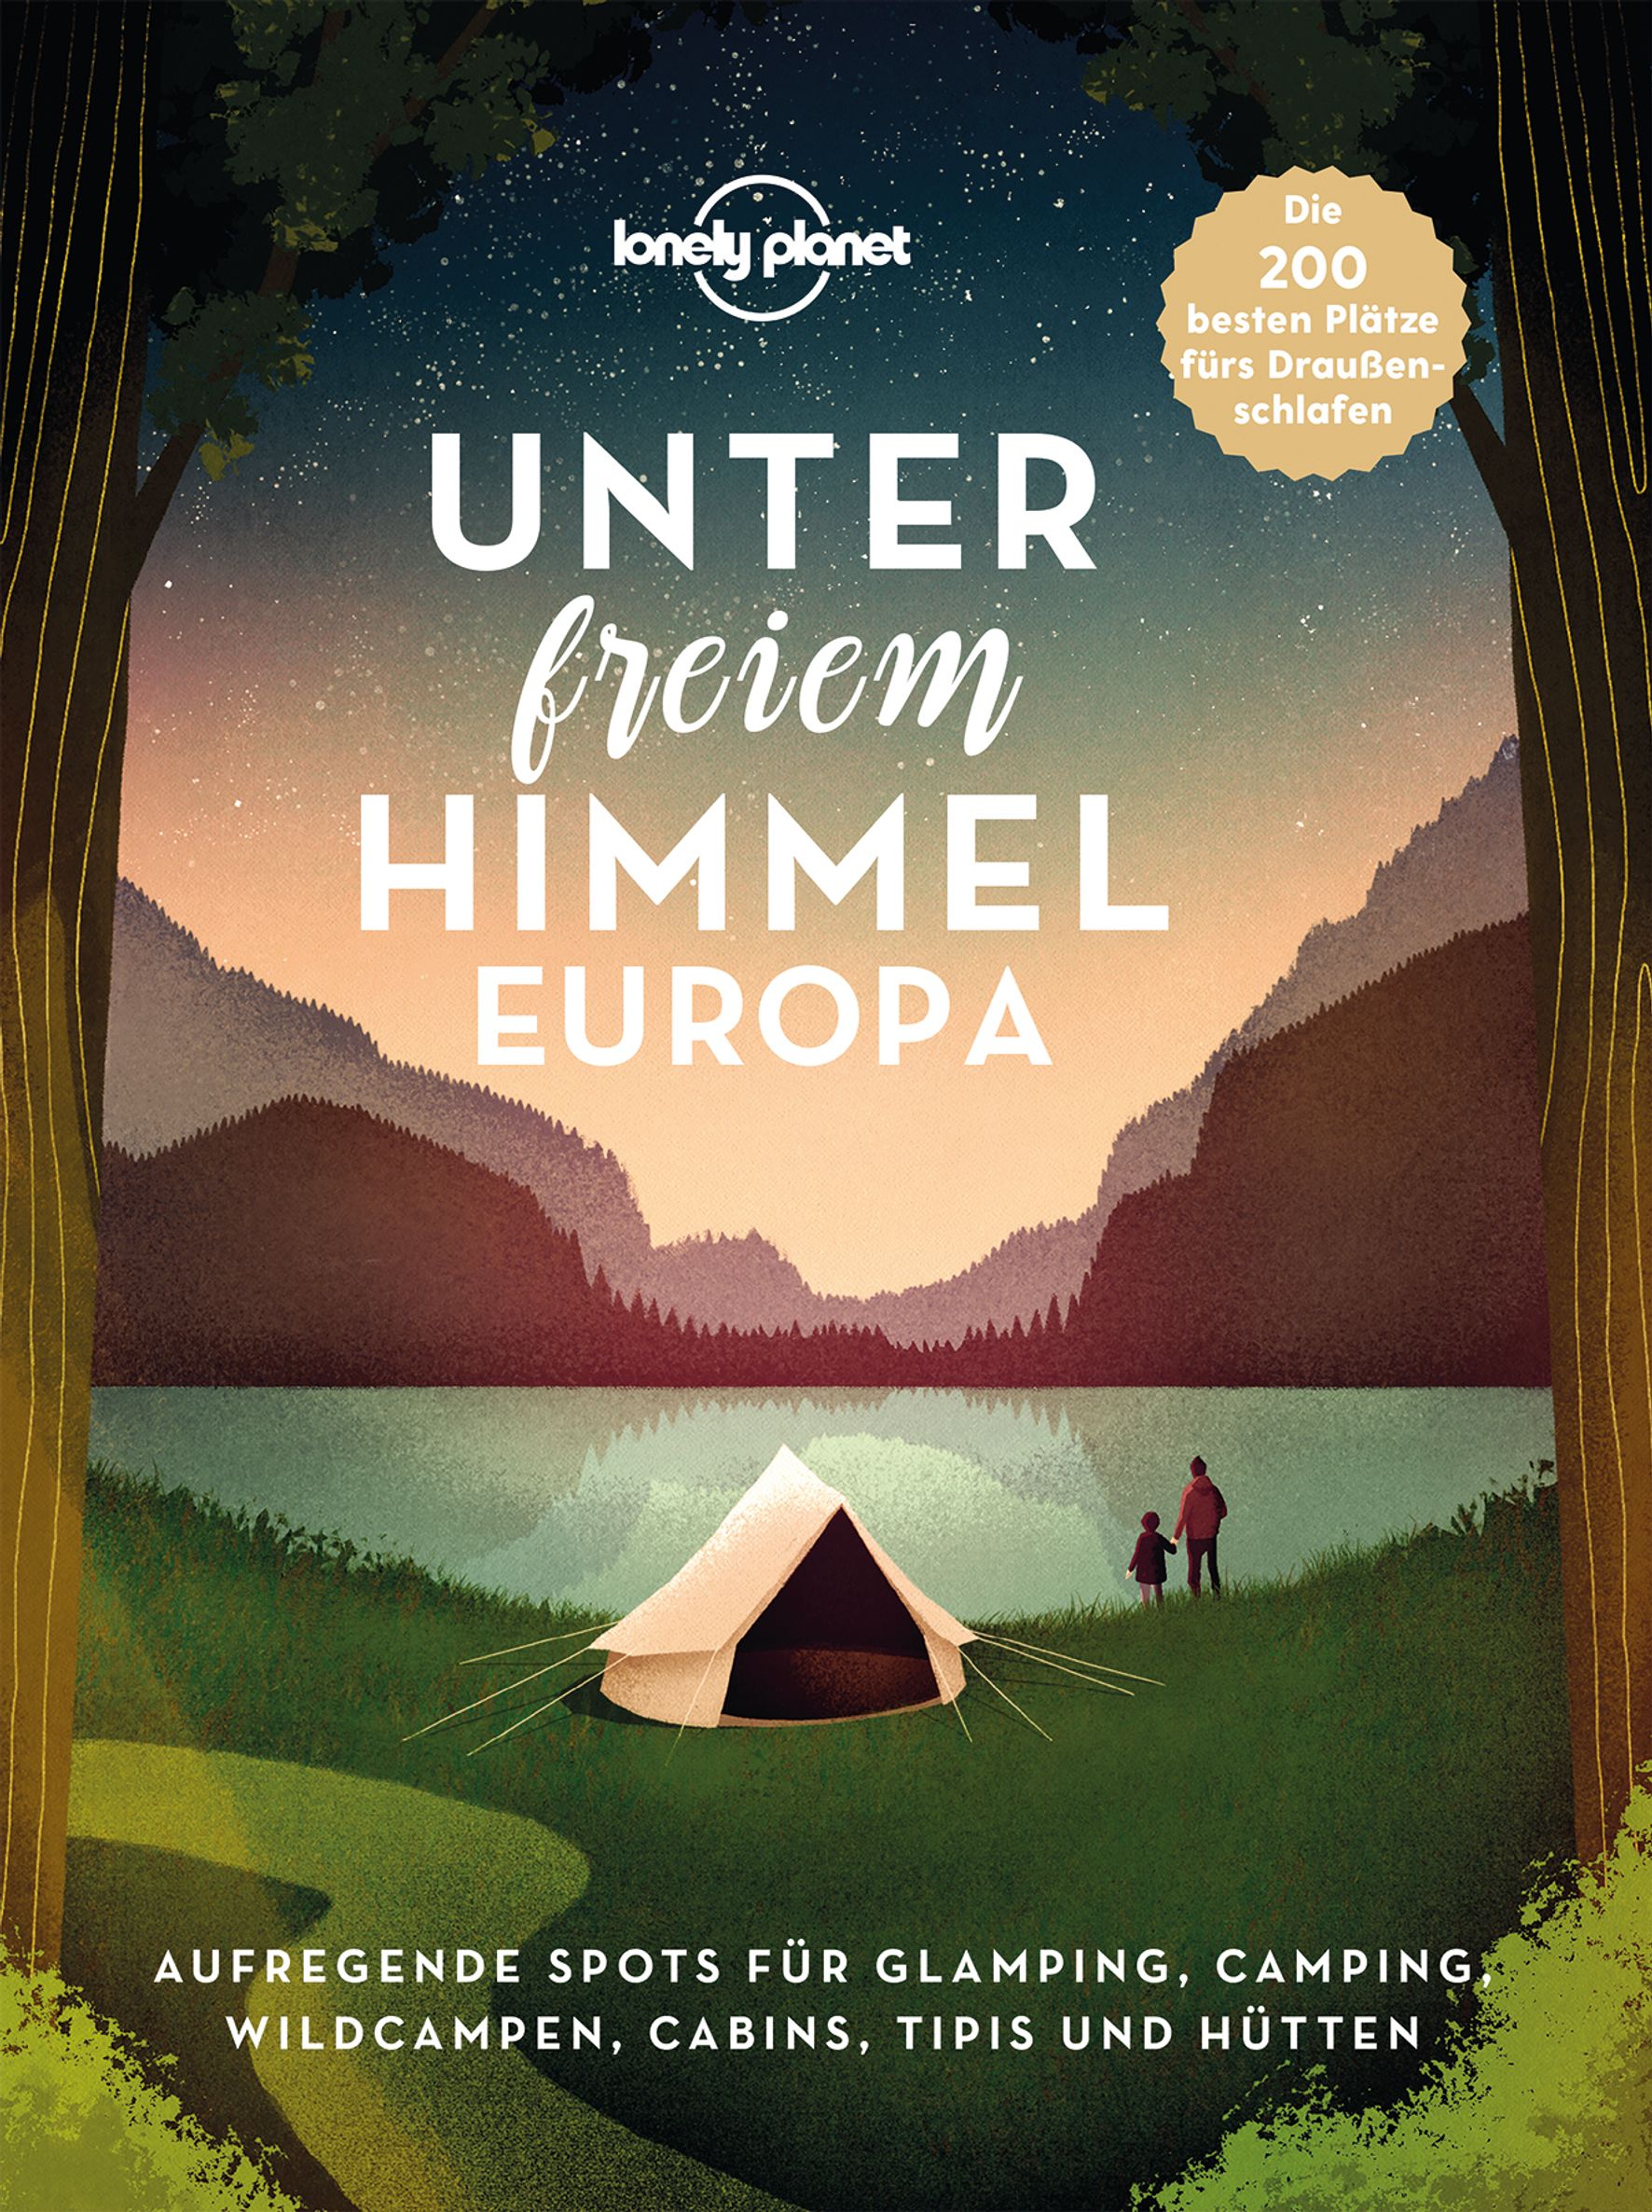 Lonely Planet Lonely Planet Unter freiem Himmel Europa